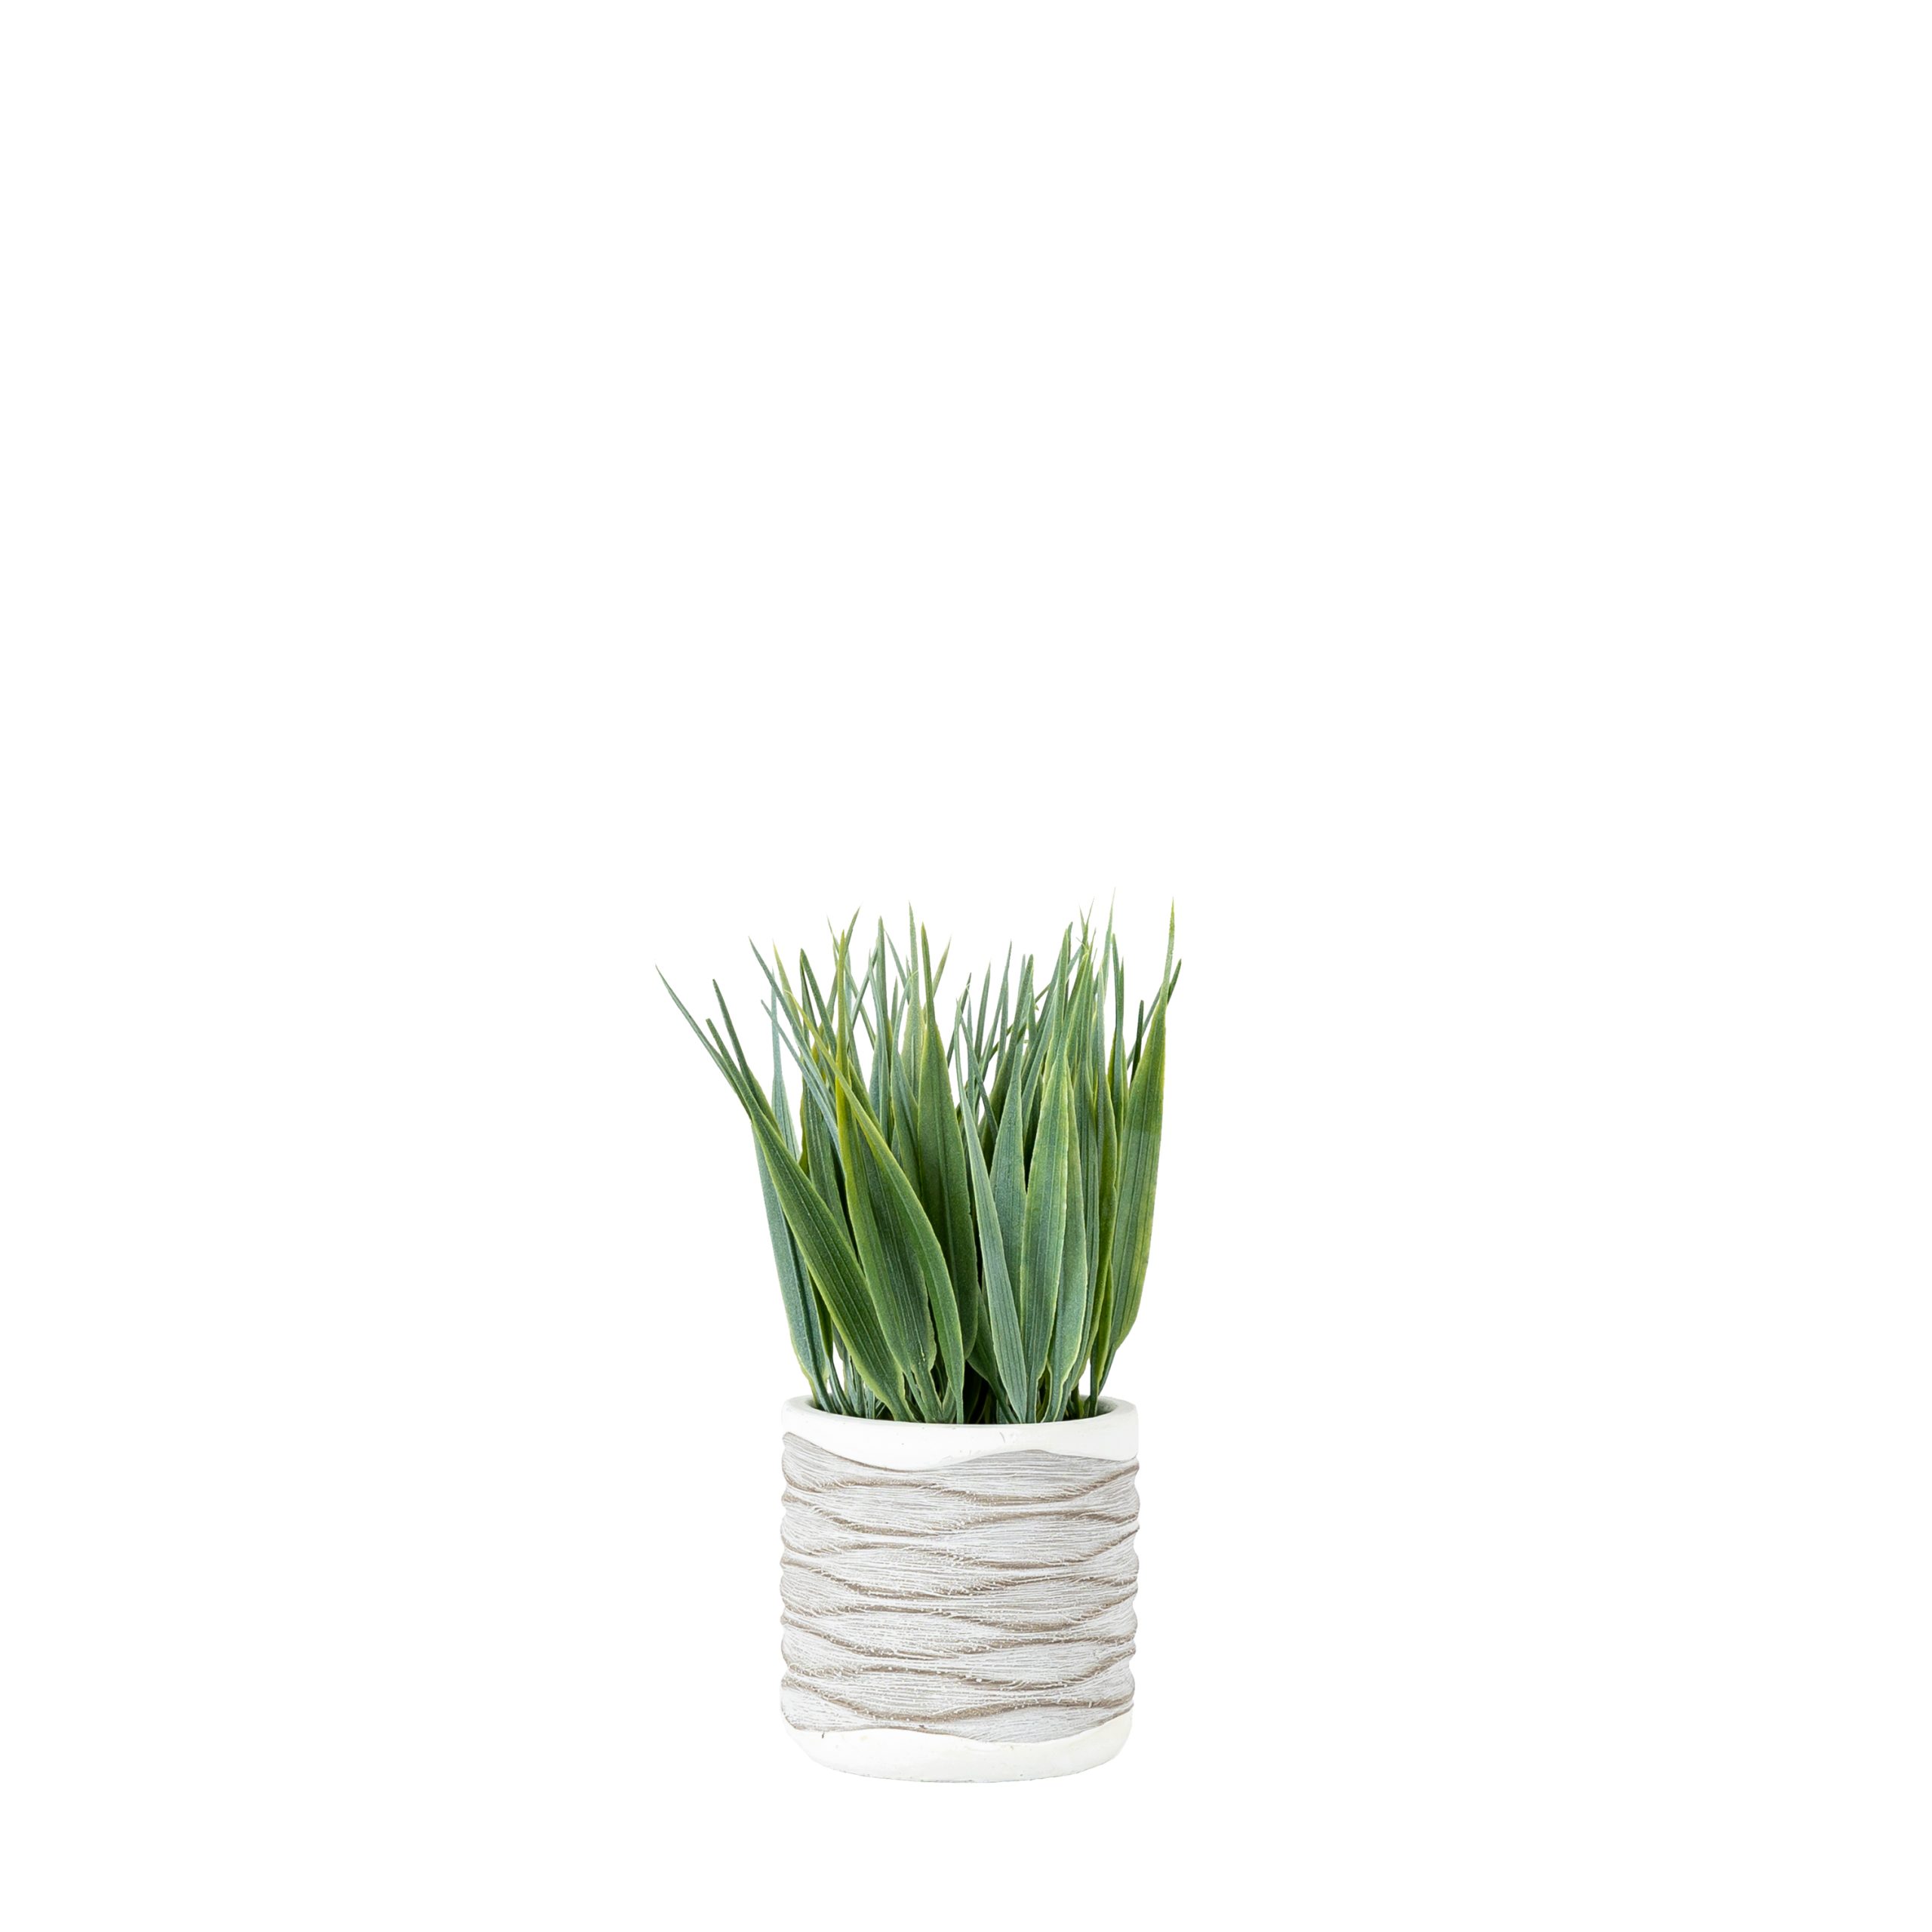 Gallery Direct Grass in Wavy Pot Small (Pack of 2)